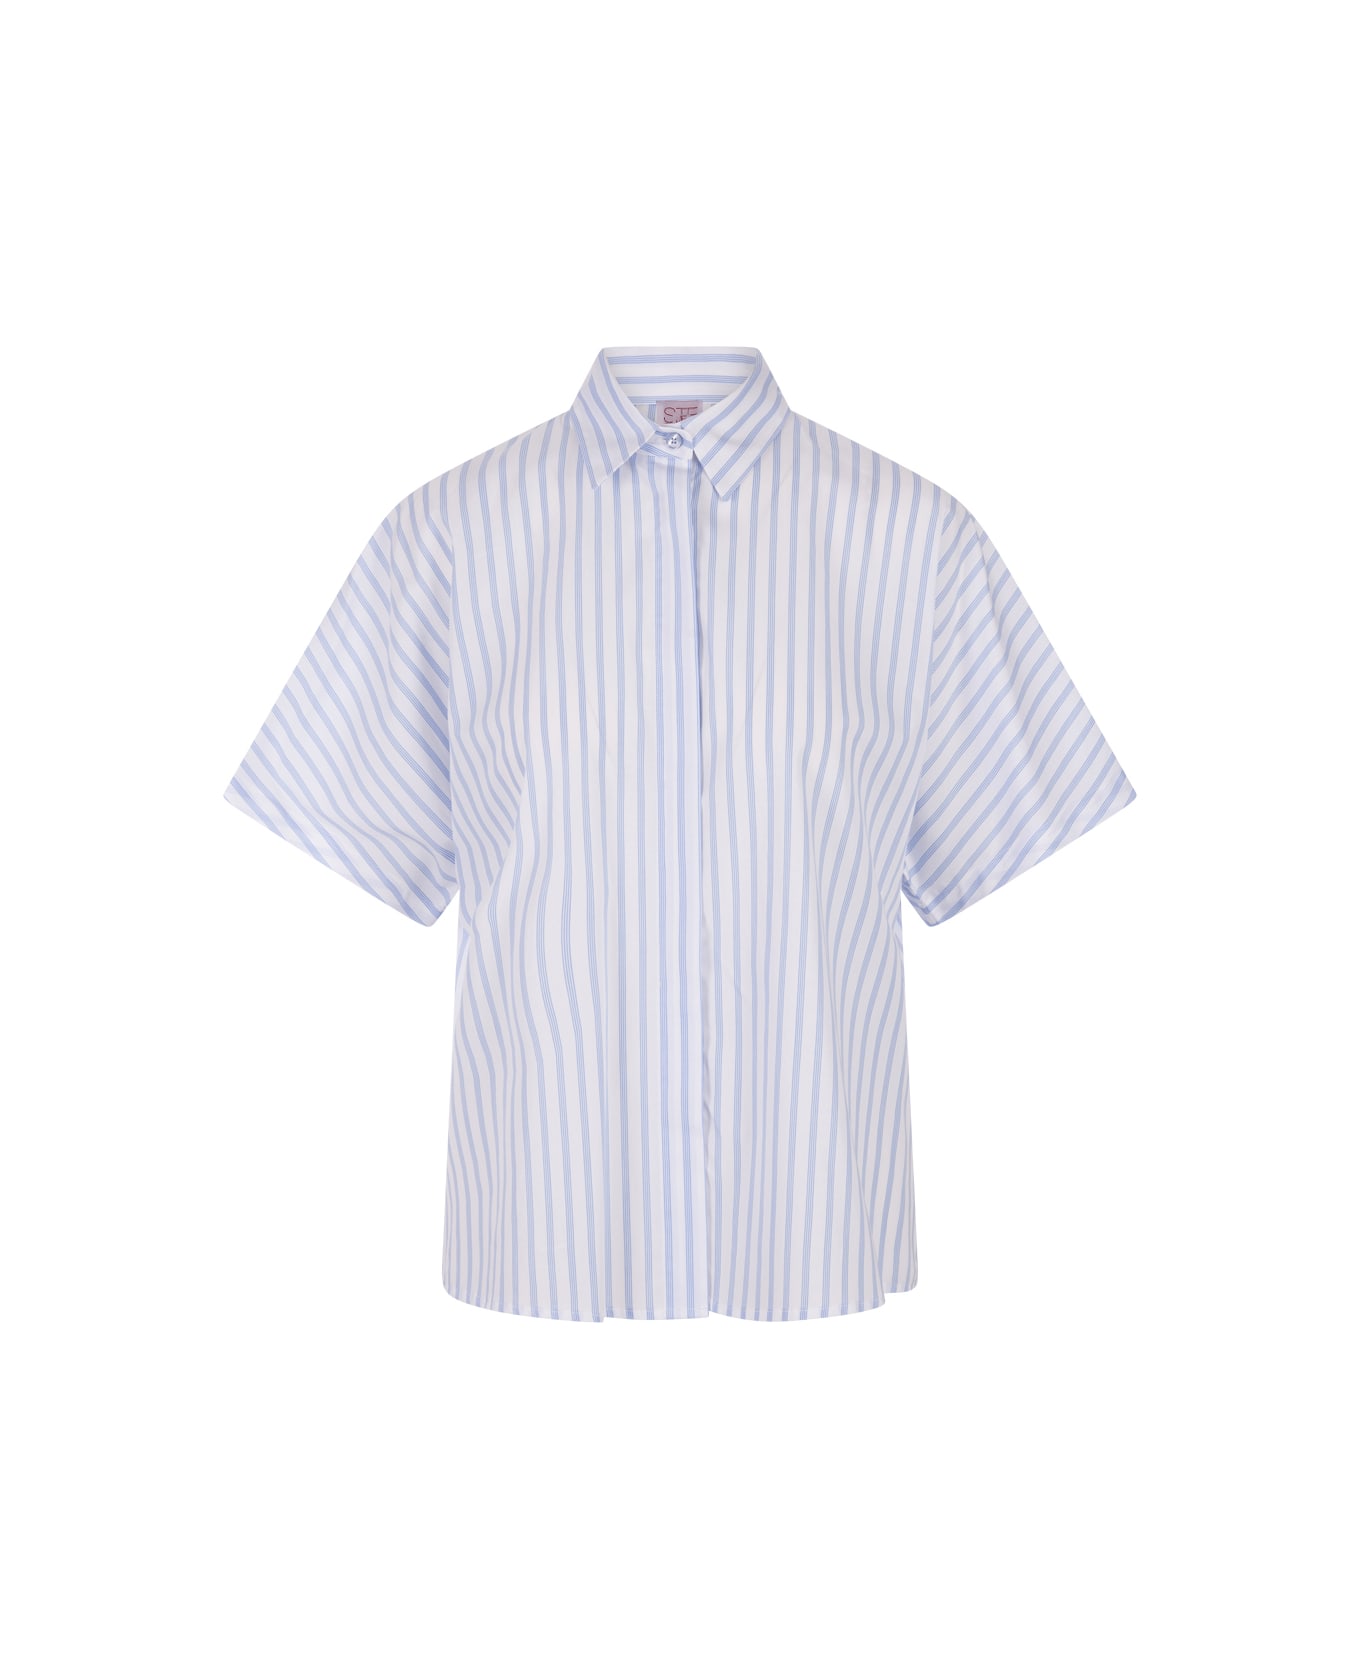 Stella Jean White And Blue Striped Shirt With Short Sleeves - Blue